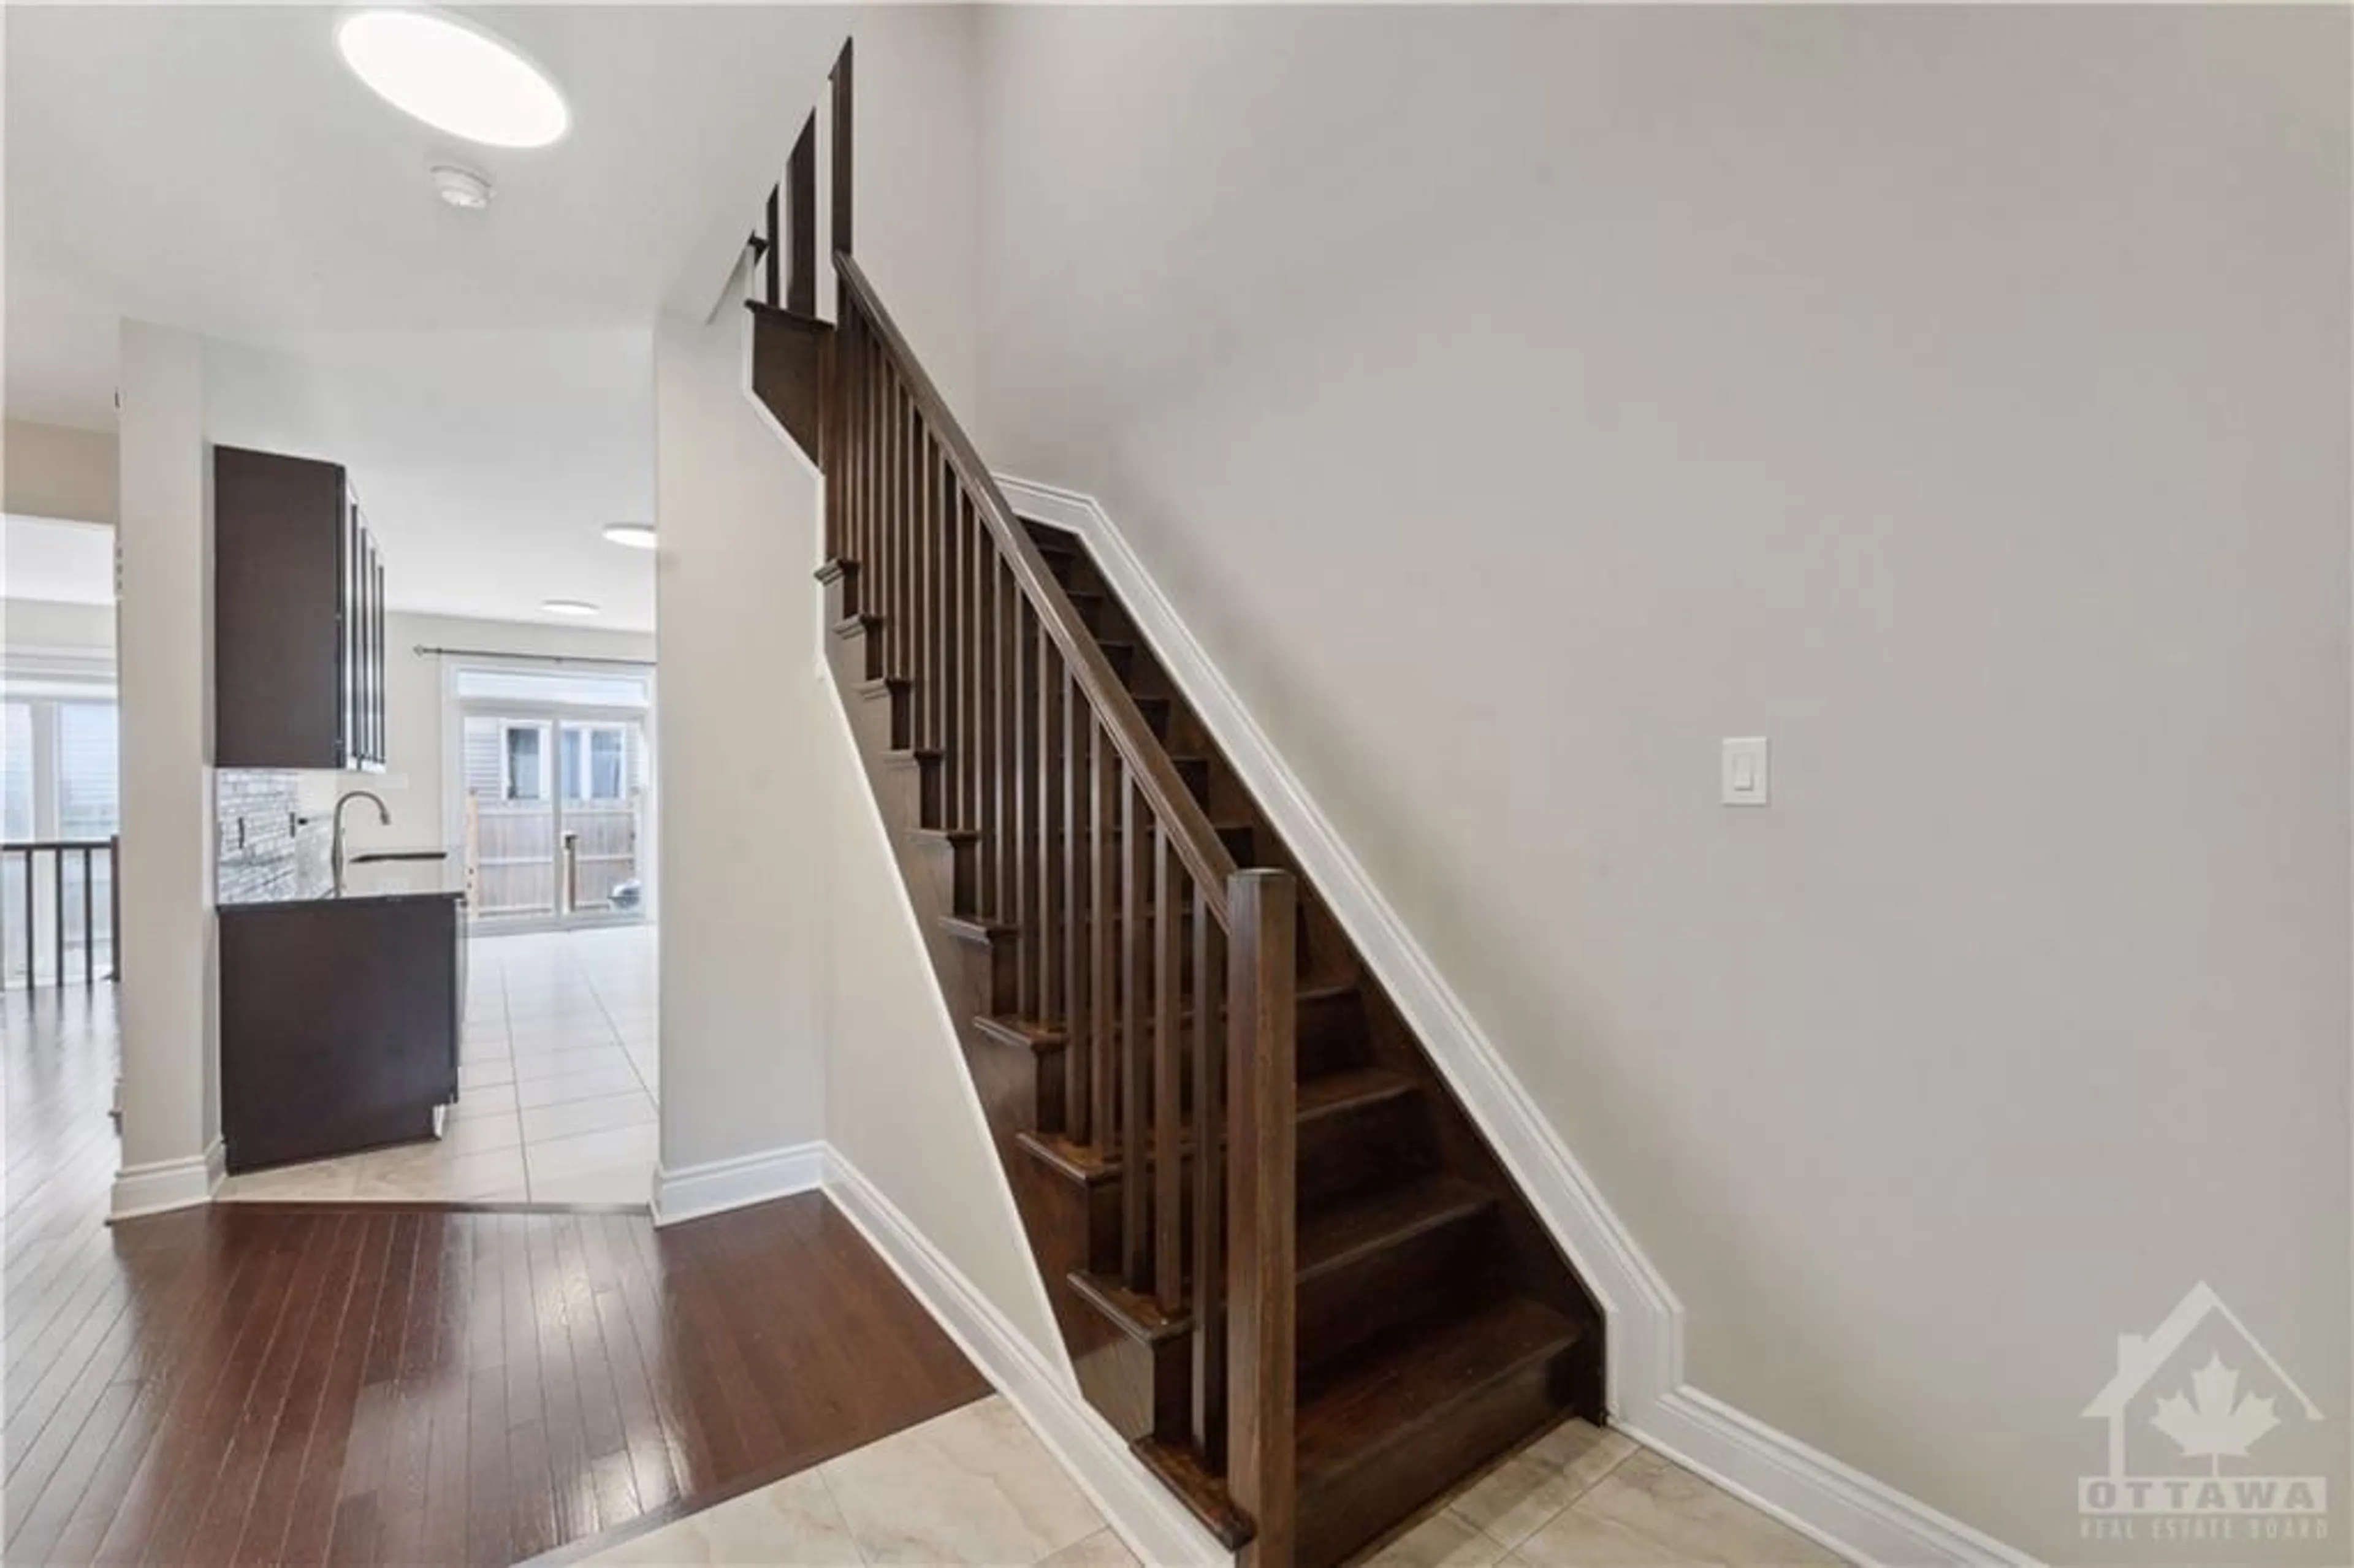 Stairs for 109 HAWKESWOOD Dr, Ottawa Ontario K4M 0C1